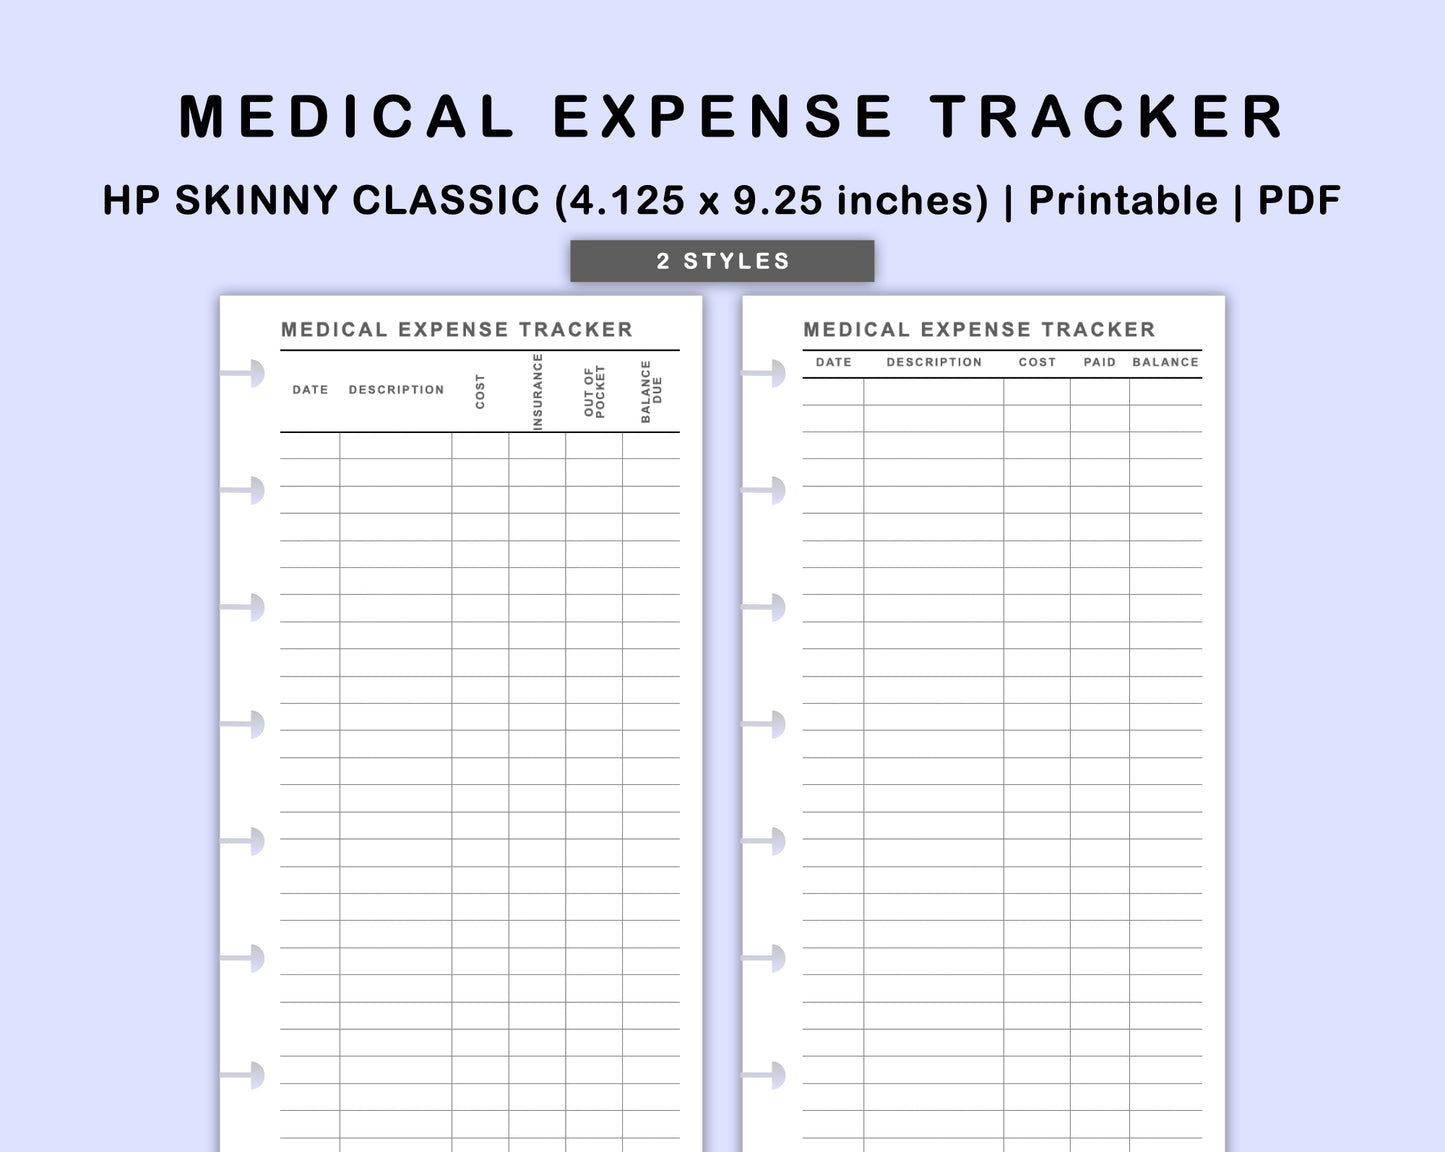 Skinny Classic HP Inserts - Medical Expense Tracker